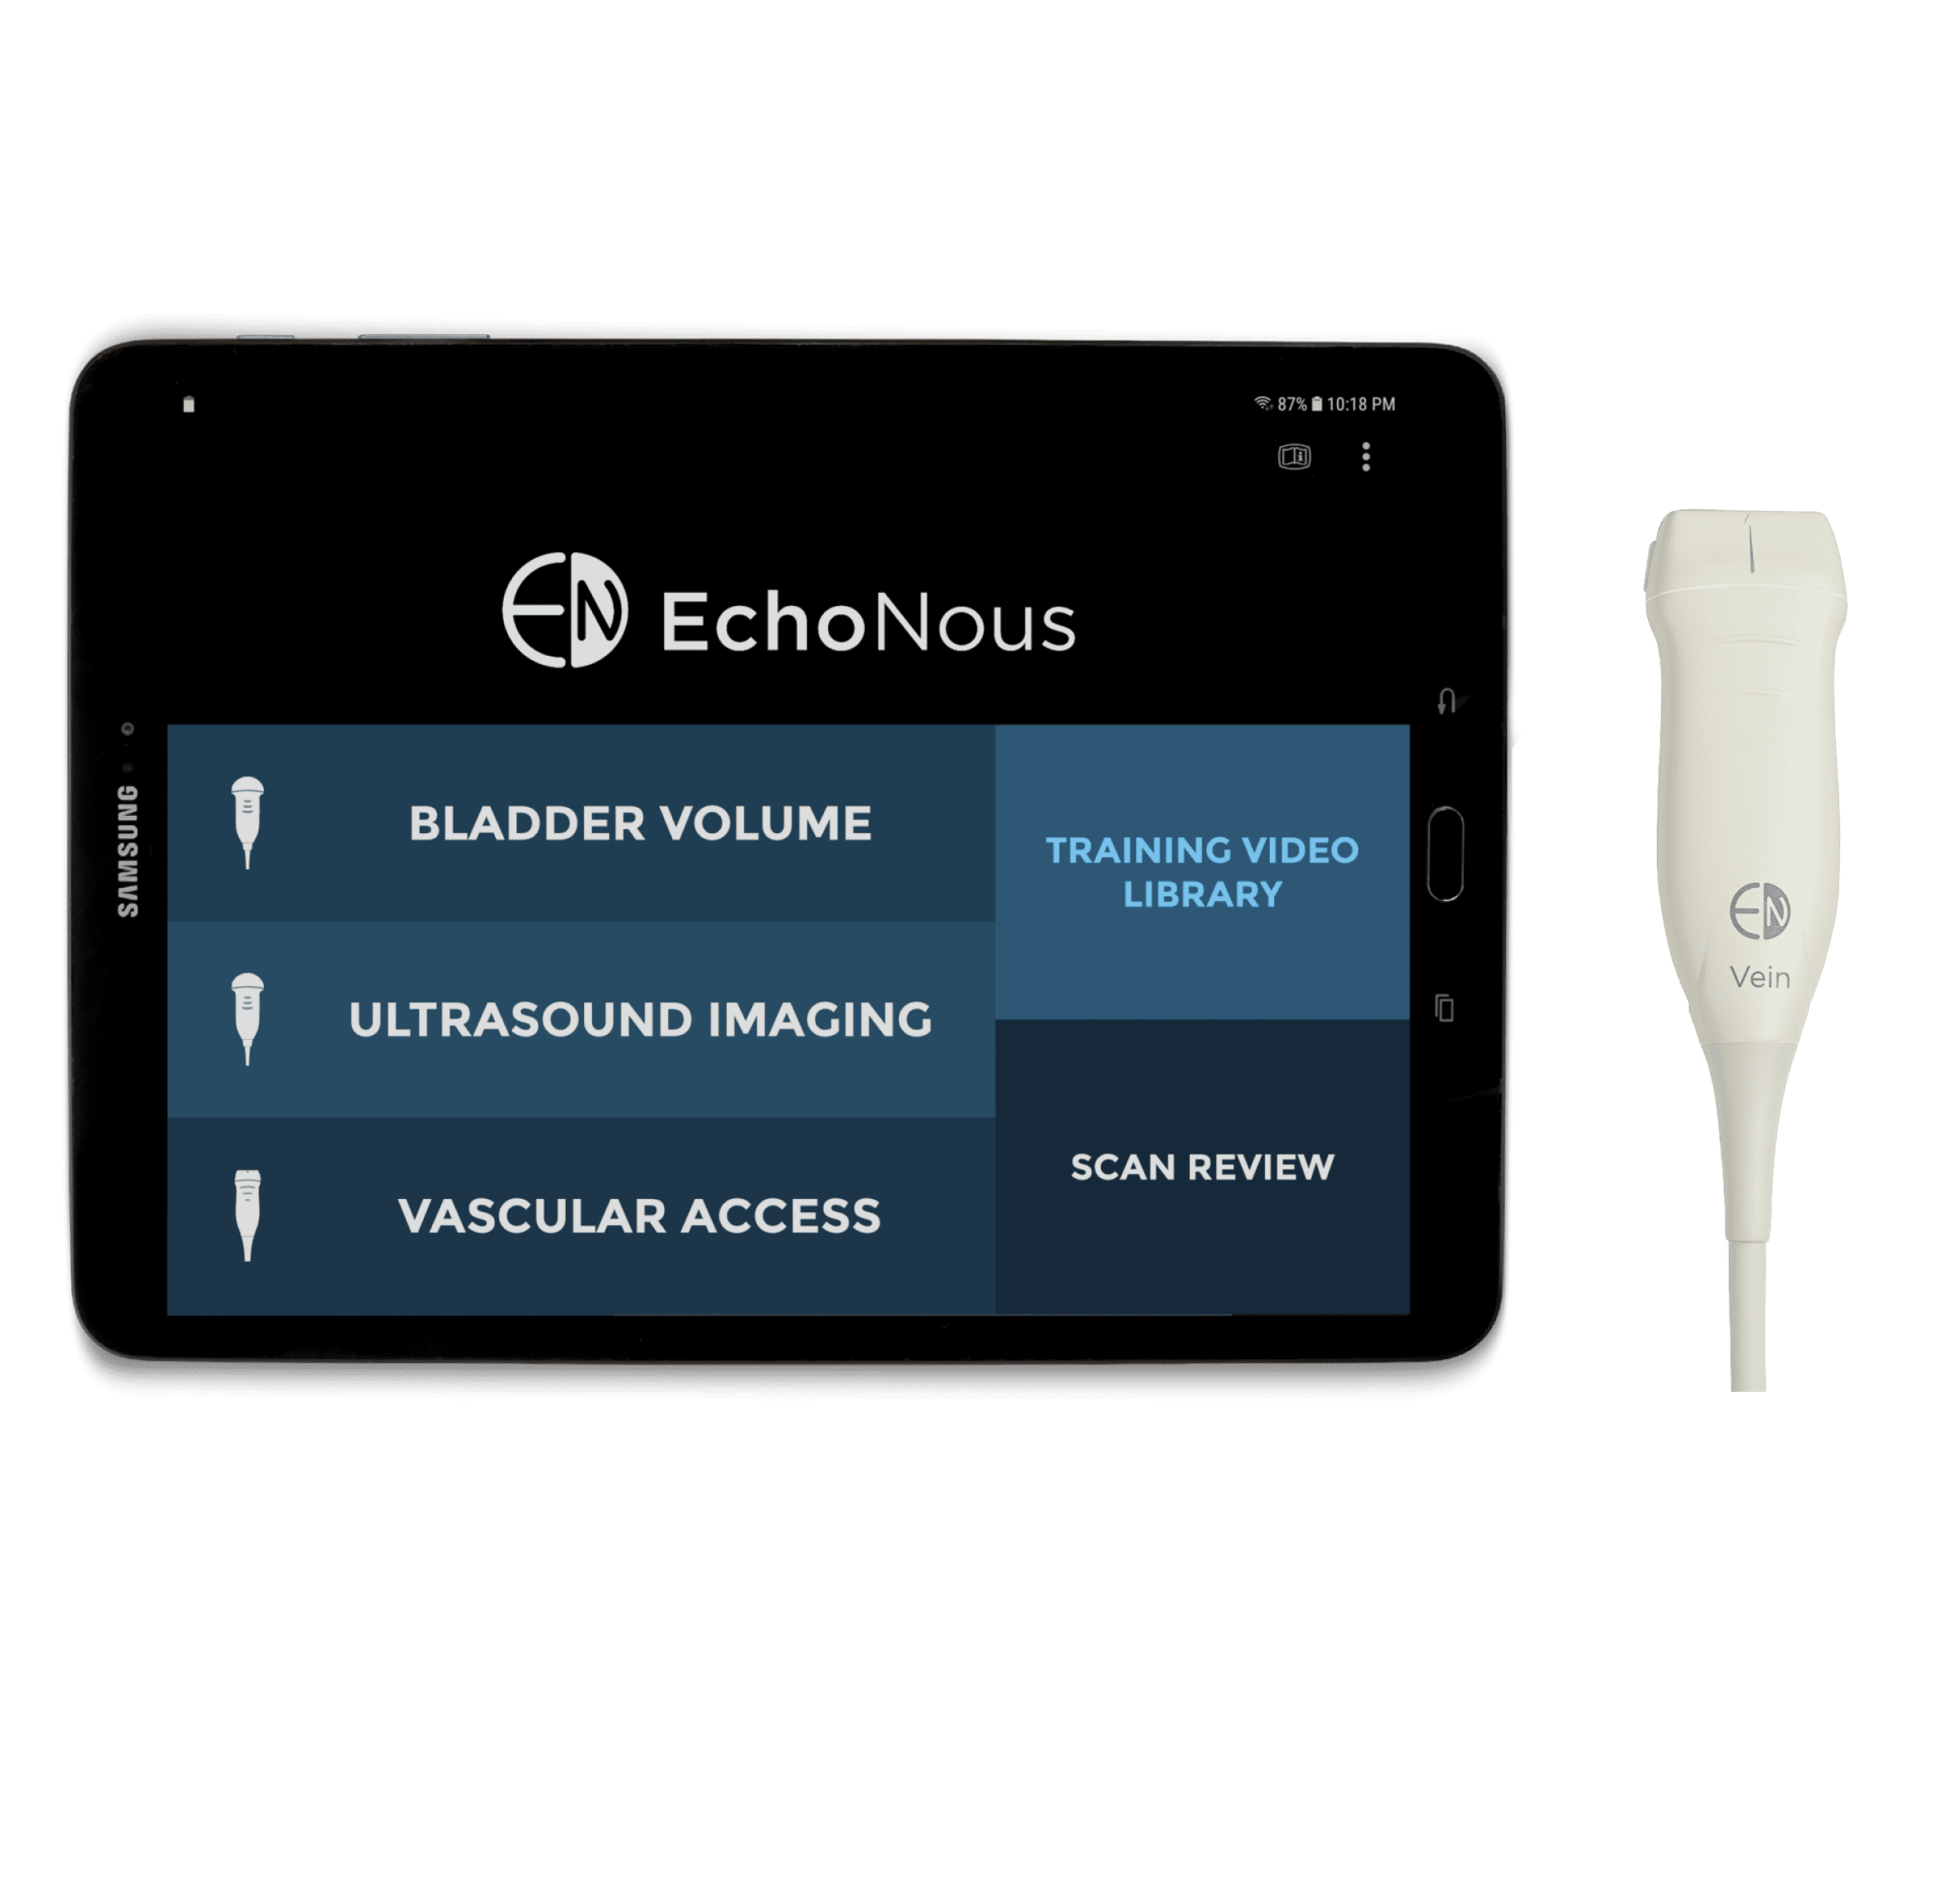 EchoNous Vein- Ultrasound guidance designed for pheripheral IV placement